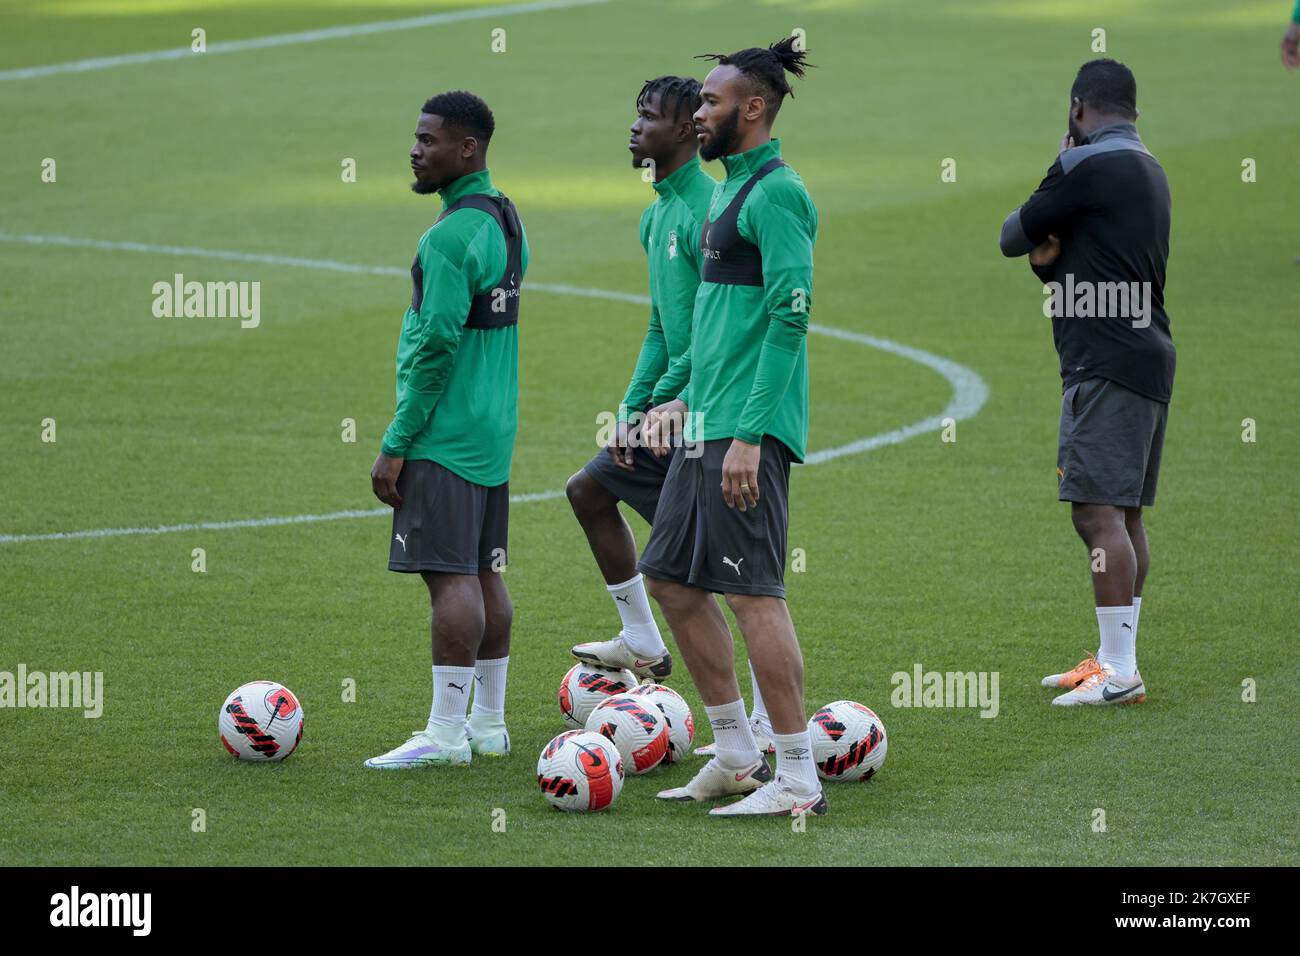 Â©PHOTOPQR/LA PROVENCE/TOMASELLI Antoine ; Marseille ; 24/03/2022 ; Foot â€¢ France / Cote d'Ivoire â€¢ ConfÃ©rence de Presse & Entrainement â€¢ Stade Orange VÃ©lodrome. training session on the eve of the friendly football match between France and Ivory Coast at the Velodrome Stadium in Marseille, southern France on March 24, 2022. Stock Photo